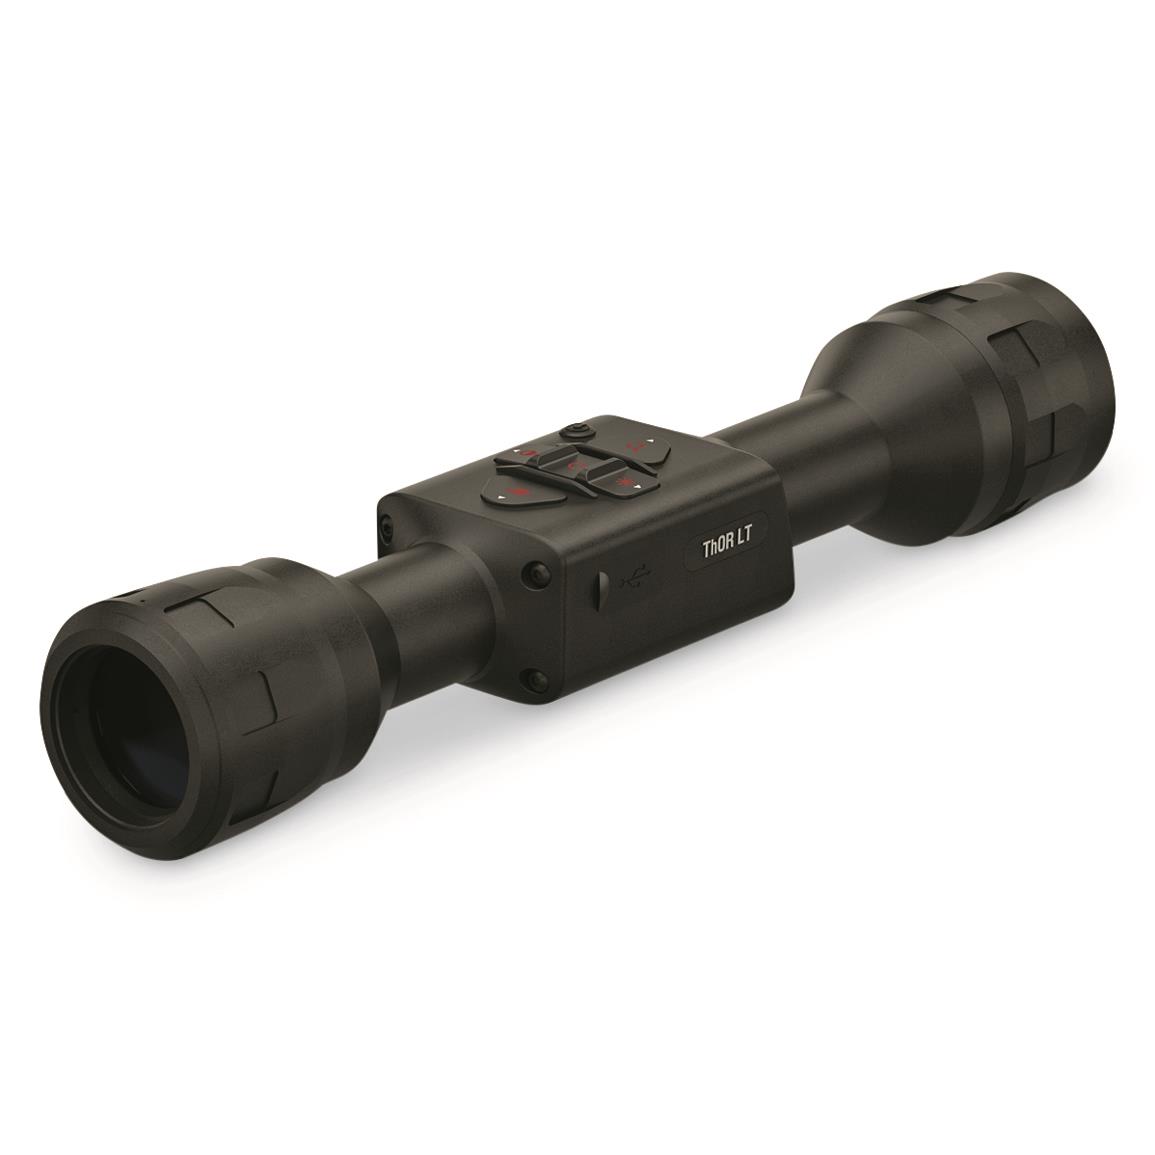 ATN ThOR LTV 320 5-15x Thermal Rifle Scope with Video Recording